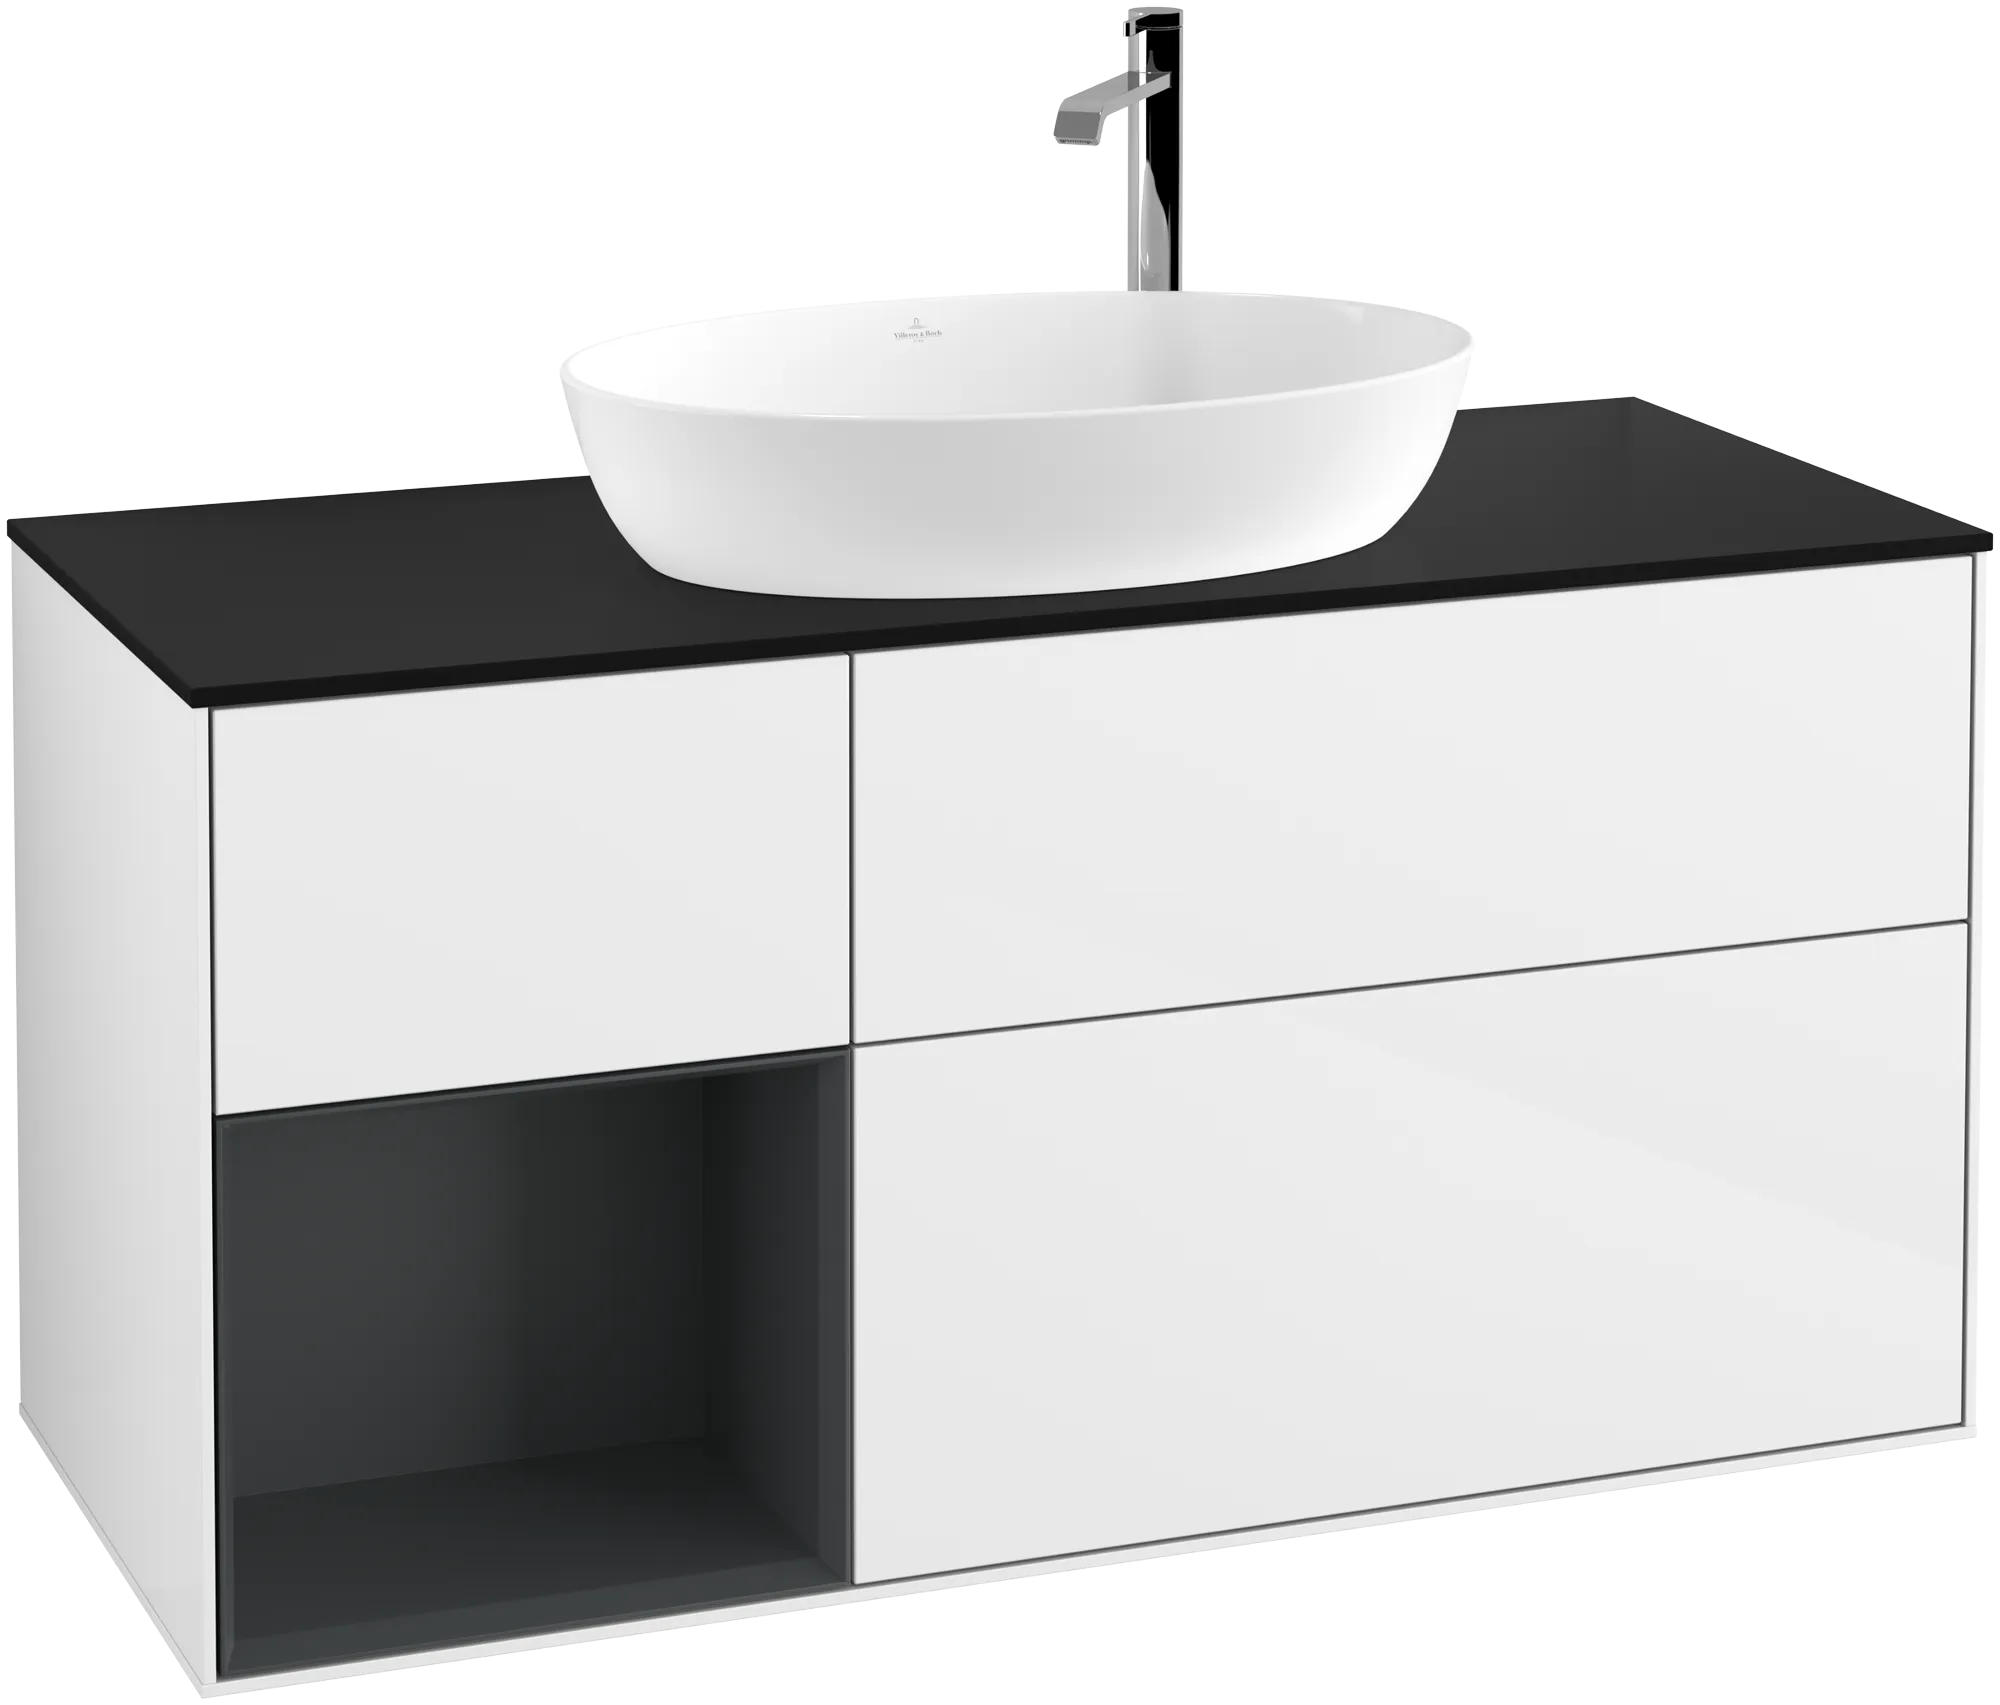 VILLEROY BOCH Finion Vanity unit, with lighting, 3 pull-out compartments, 1200 x 603 x 501 mm, Glossy White Lacquer / Midnight Blue Matt Lacquer / Glass Black Matt #G942HGGF resmi